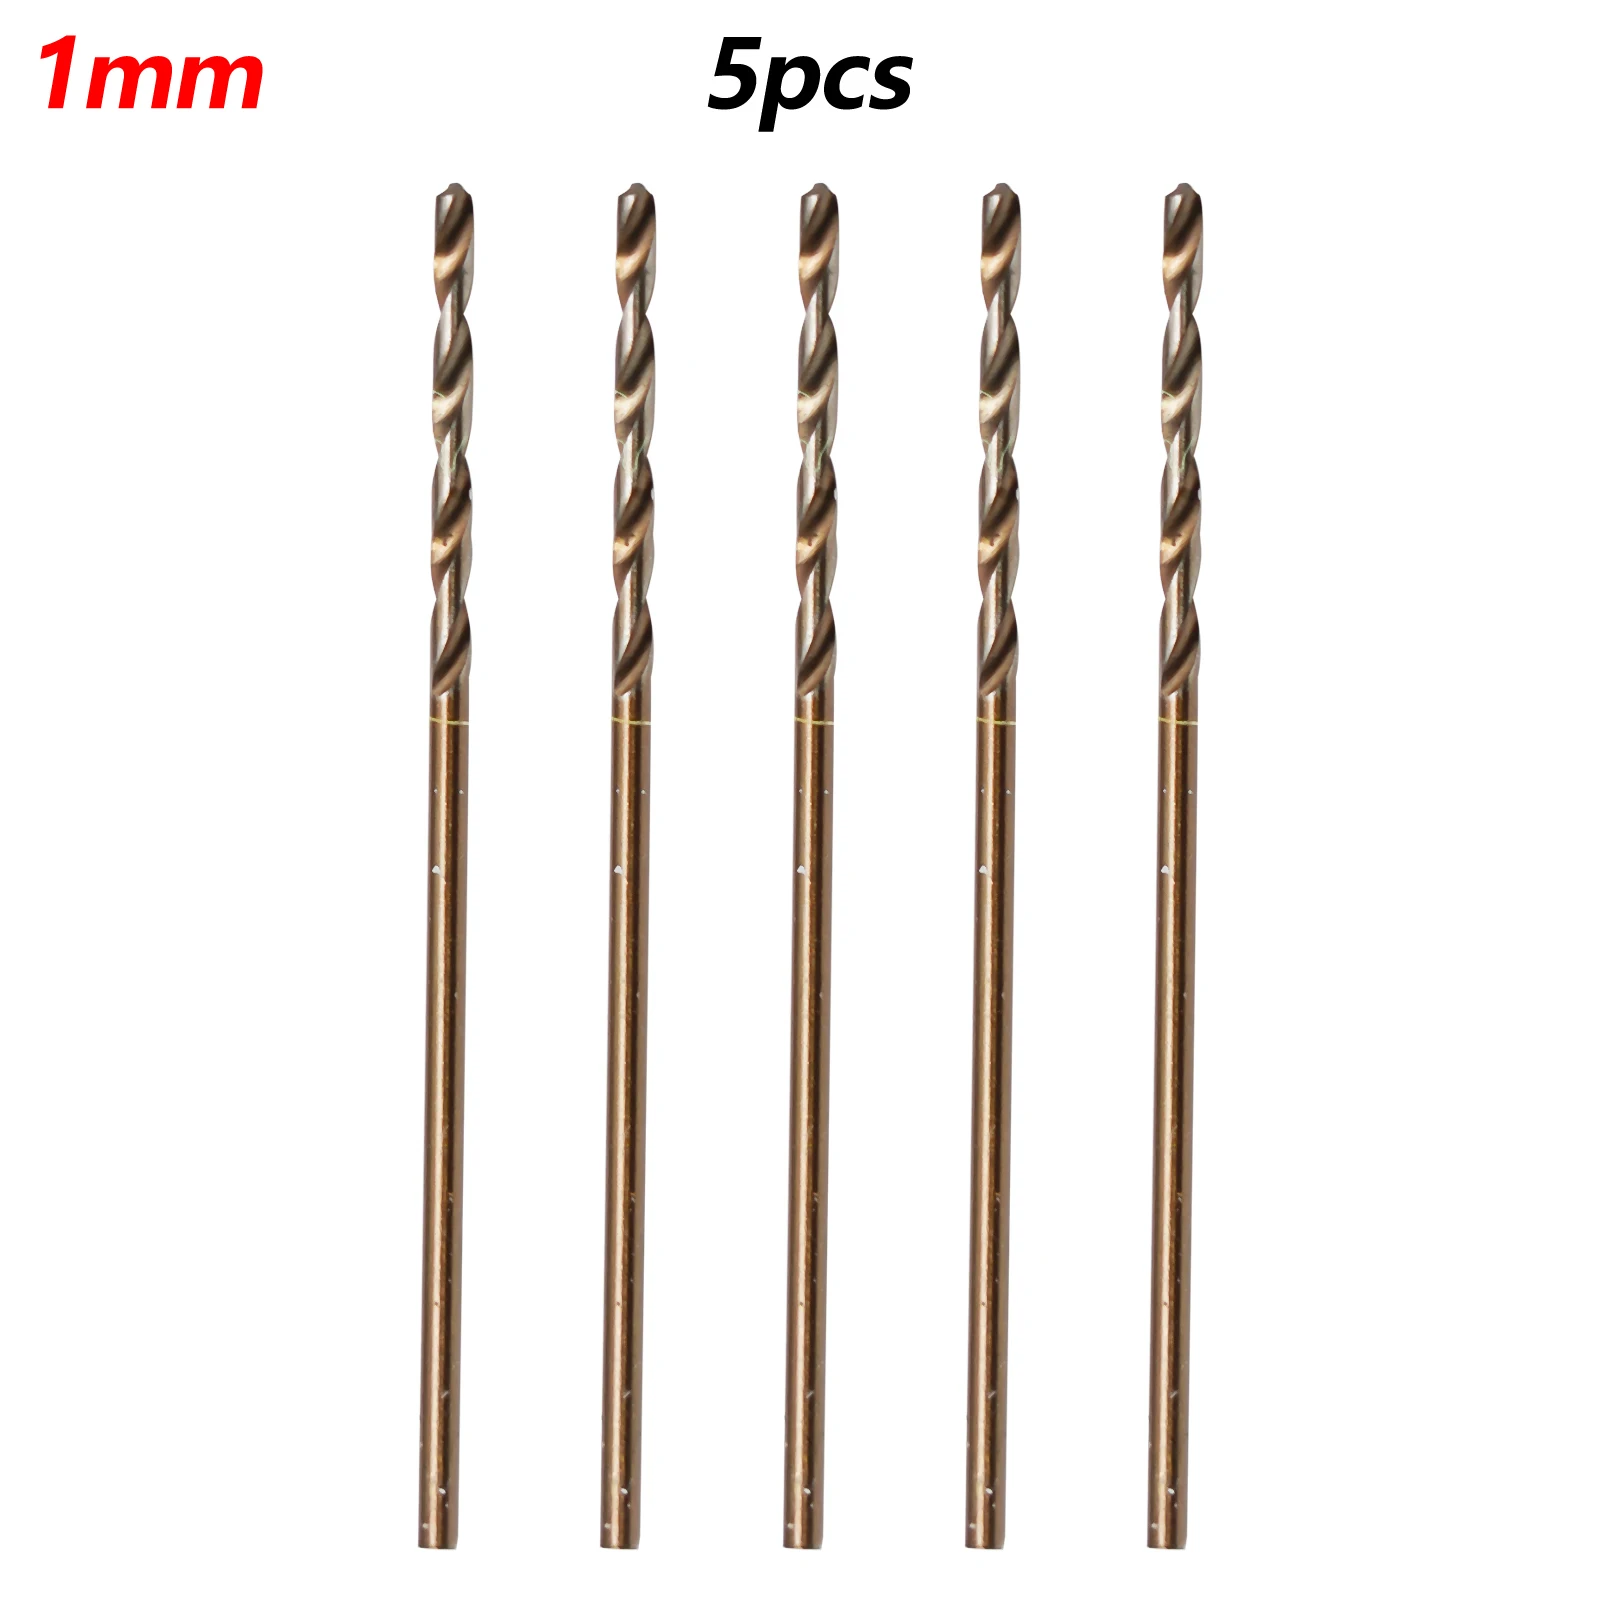 

5pcs HSS M35 Cobalt Drill Bit 1-4mm For Stainless Steel Metal Wood Hole Cutter Electric Drill Drill Tool DIY Woodwork Drill